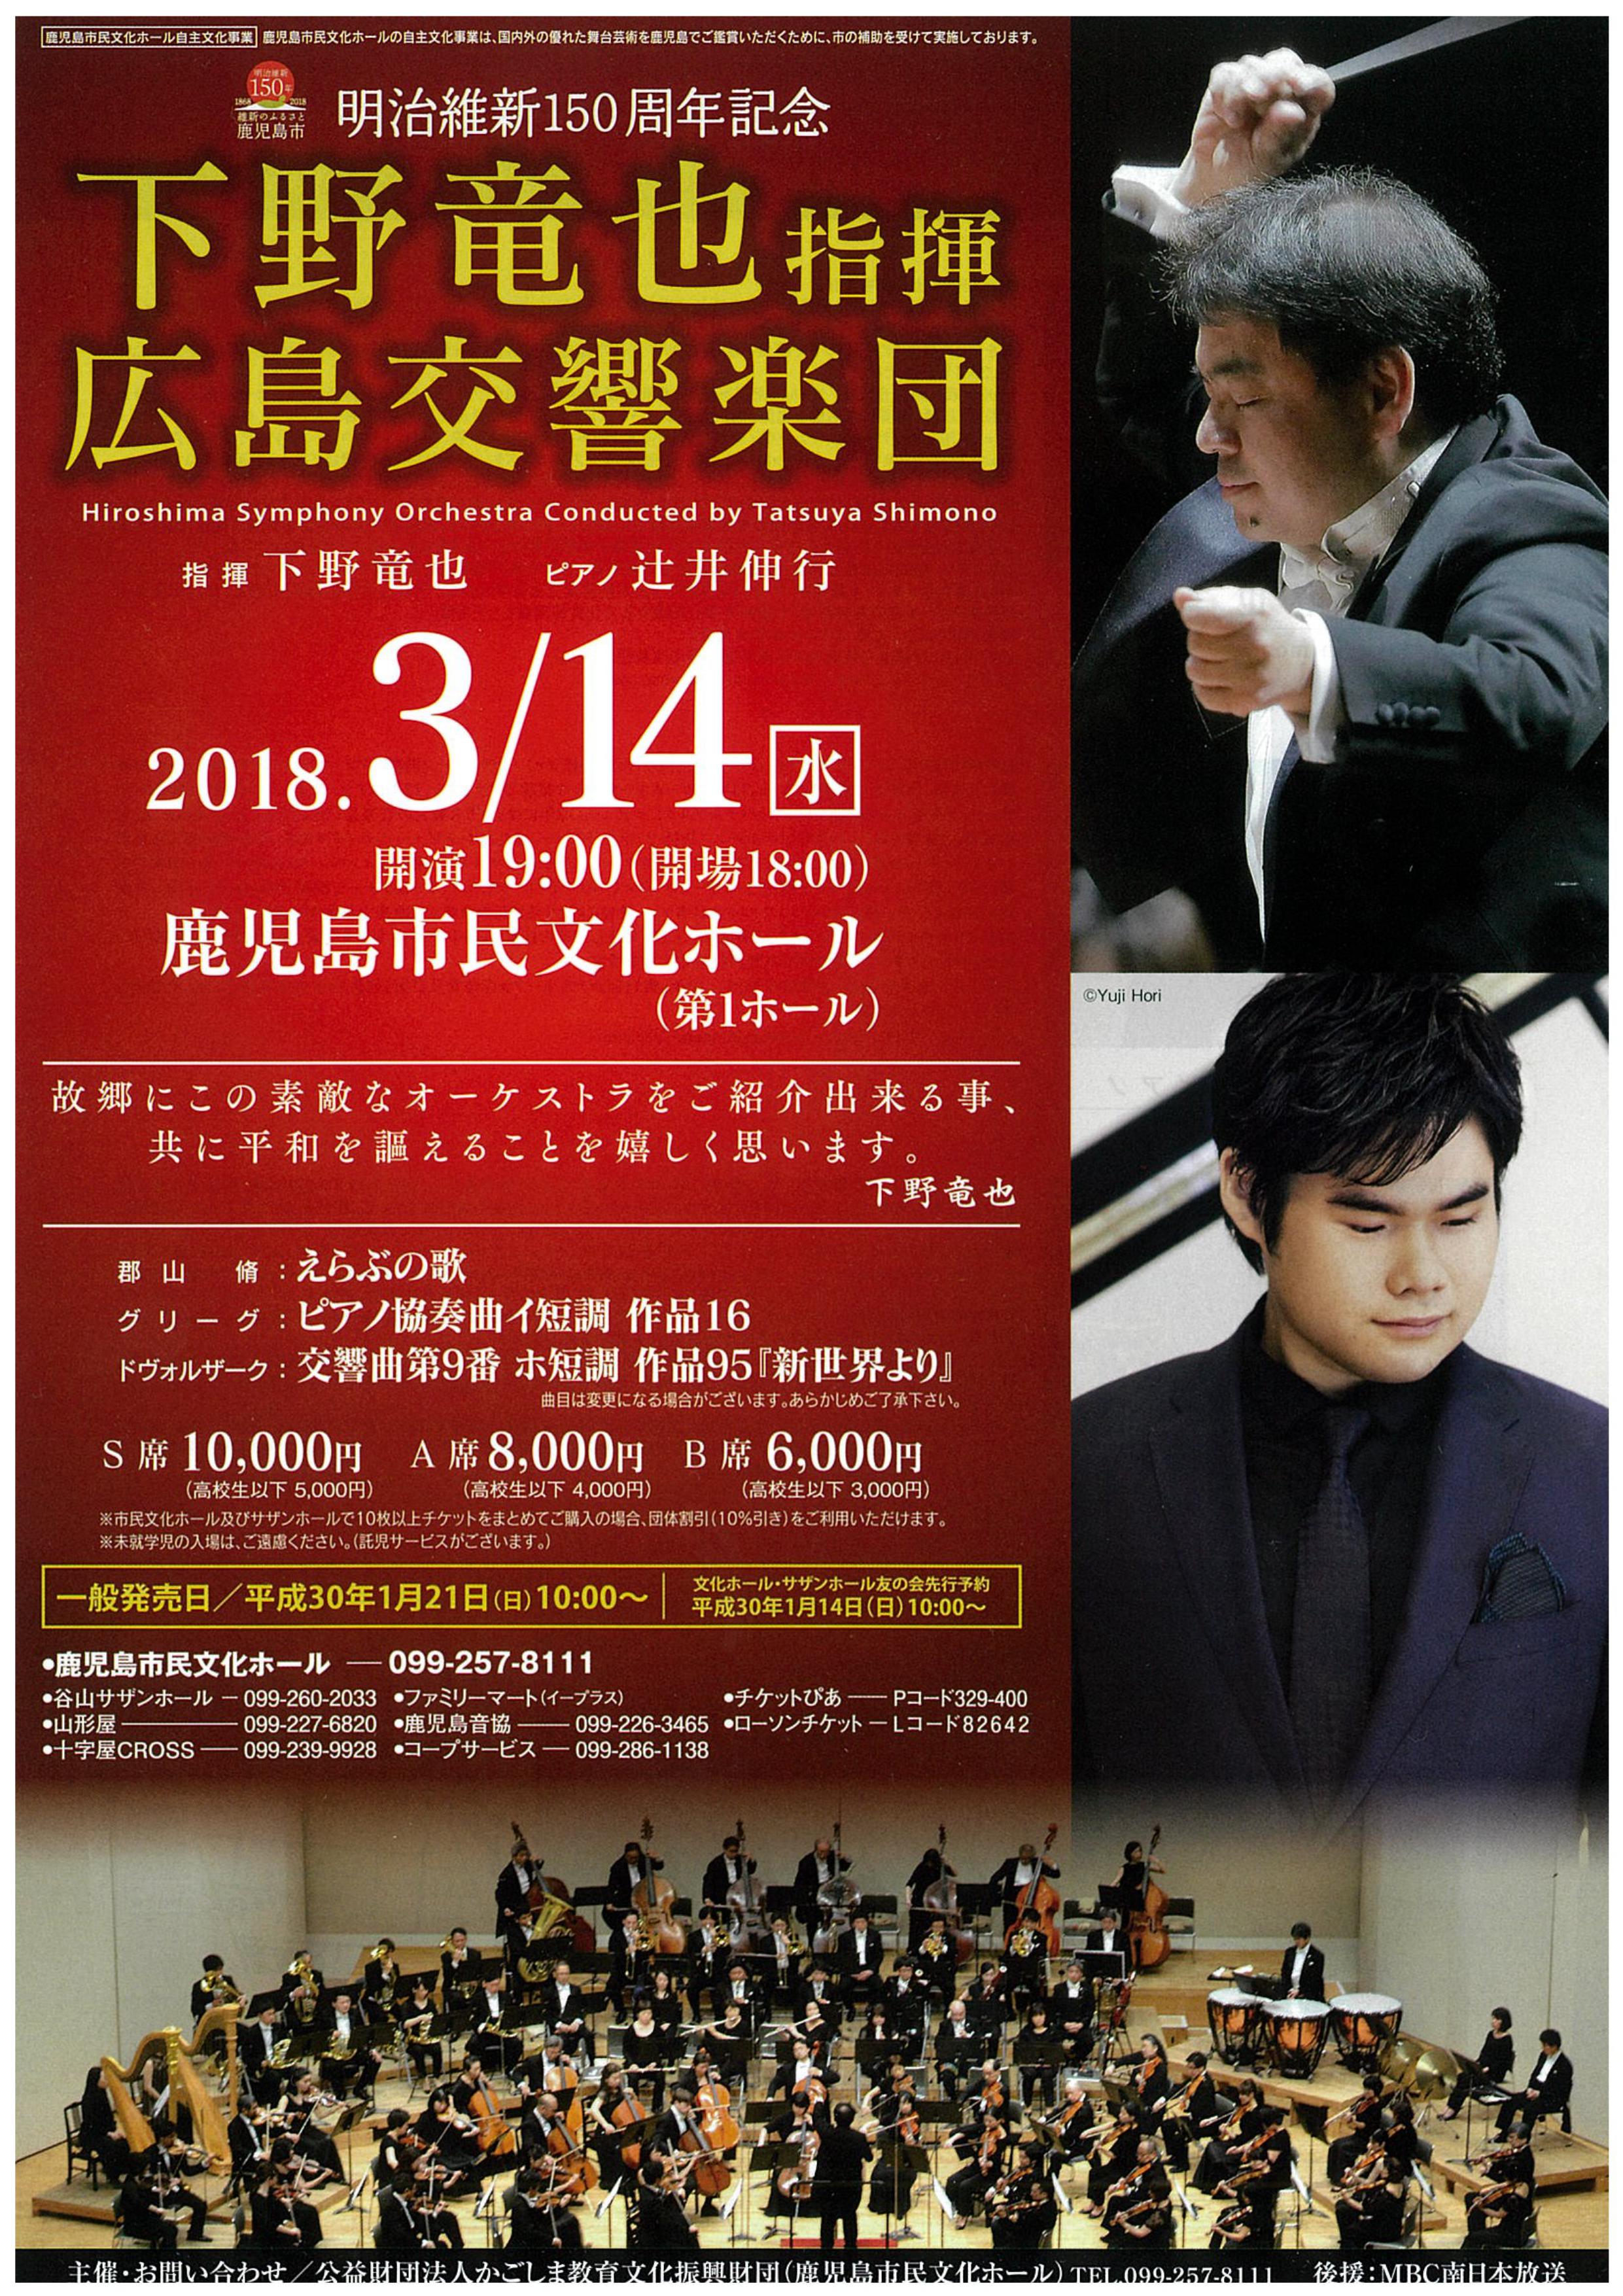 This week’s concert (12 March – 18 March, 2018)